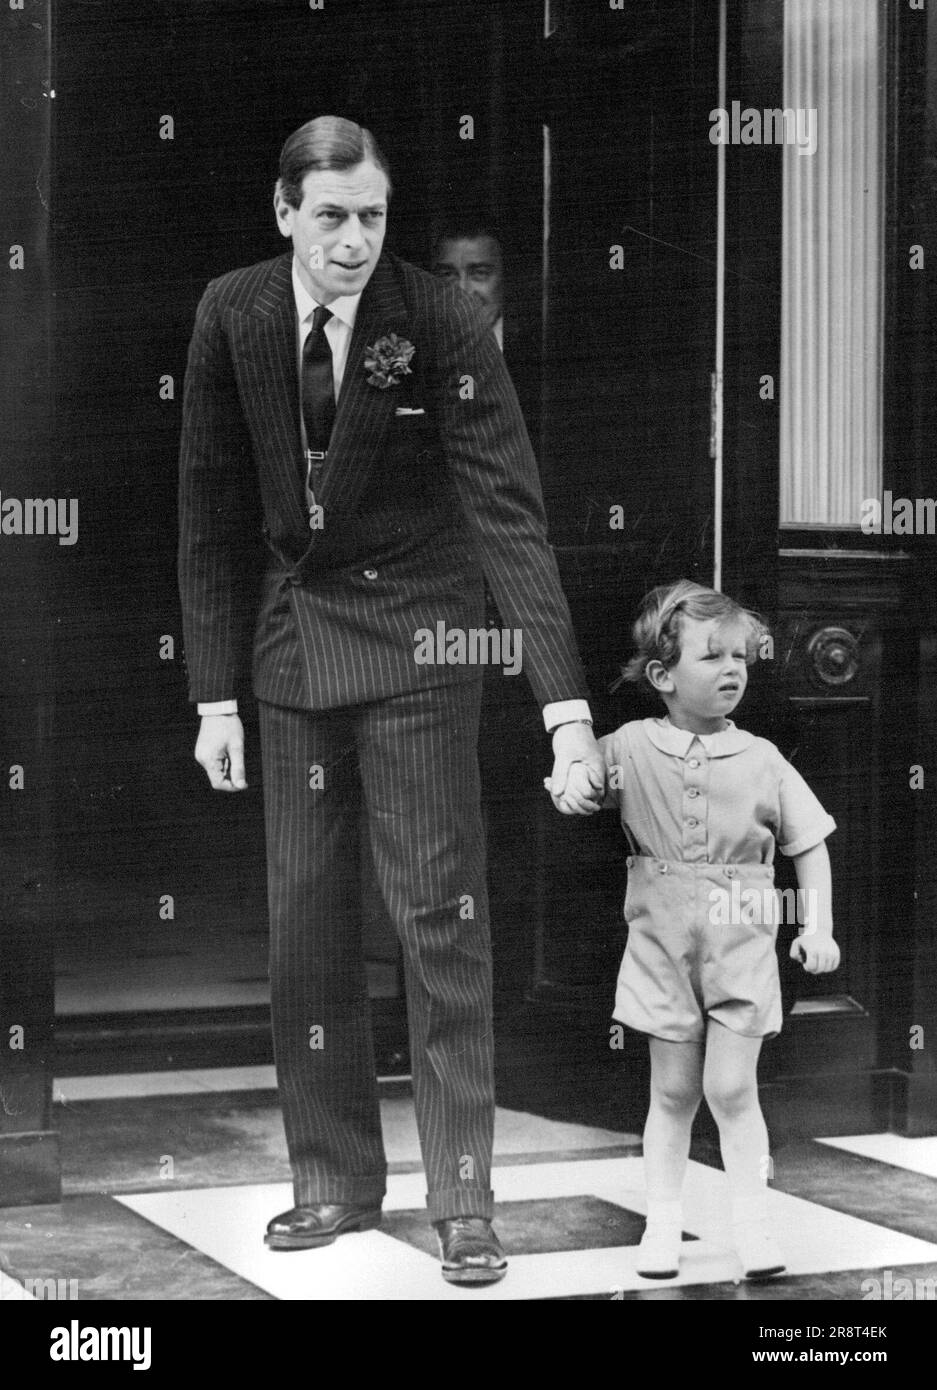 Royal Father and Son See Guests Off After Luncheon - The Duke of Kent with his son, Prince Edward seeing some of their guests off from their home in Belgrave Square after the Luncheon. The Duke and Duchess of Kent entertained friends to a Luncheon Party today after they had attended the ceremony of the trooping the colour. June 9, 1938. (Photo by Keystone). Stock Photo